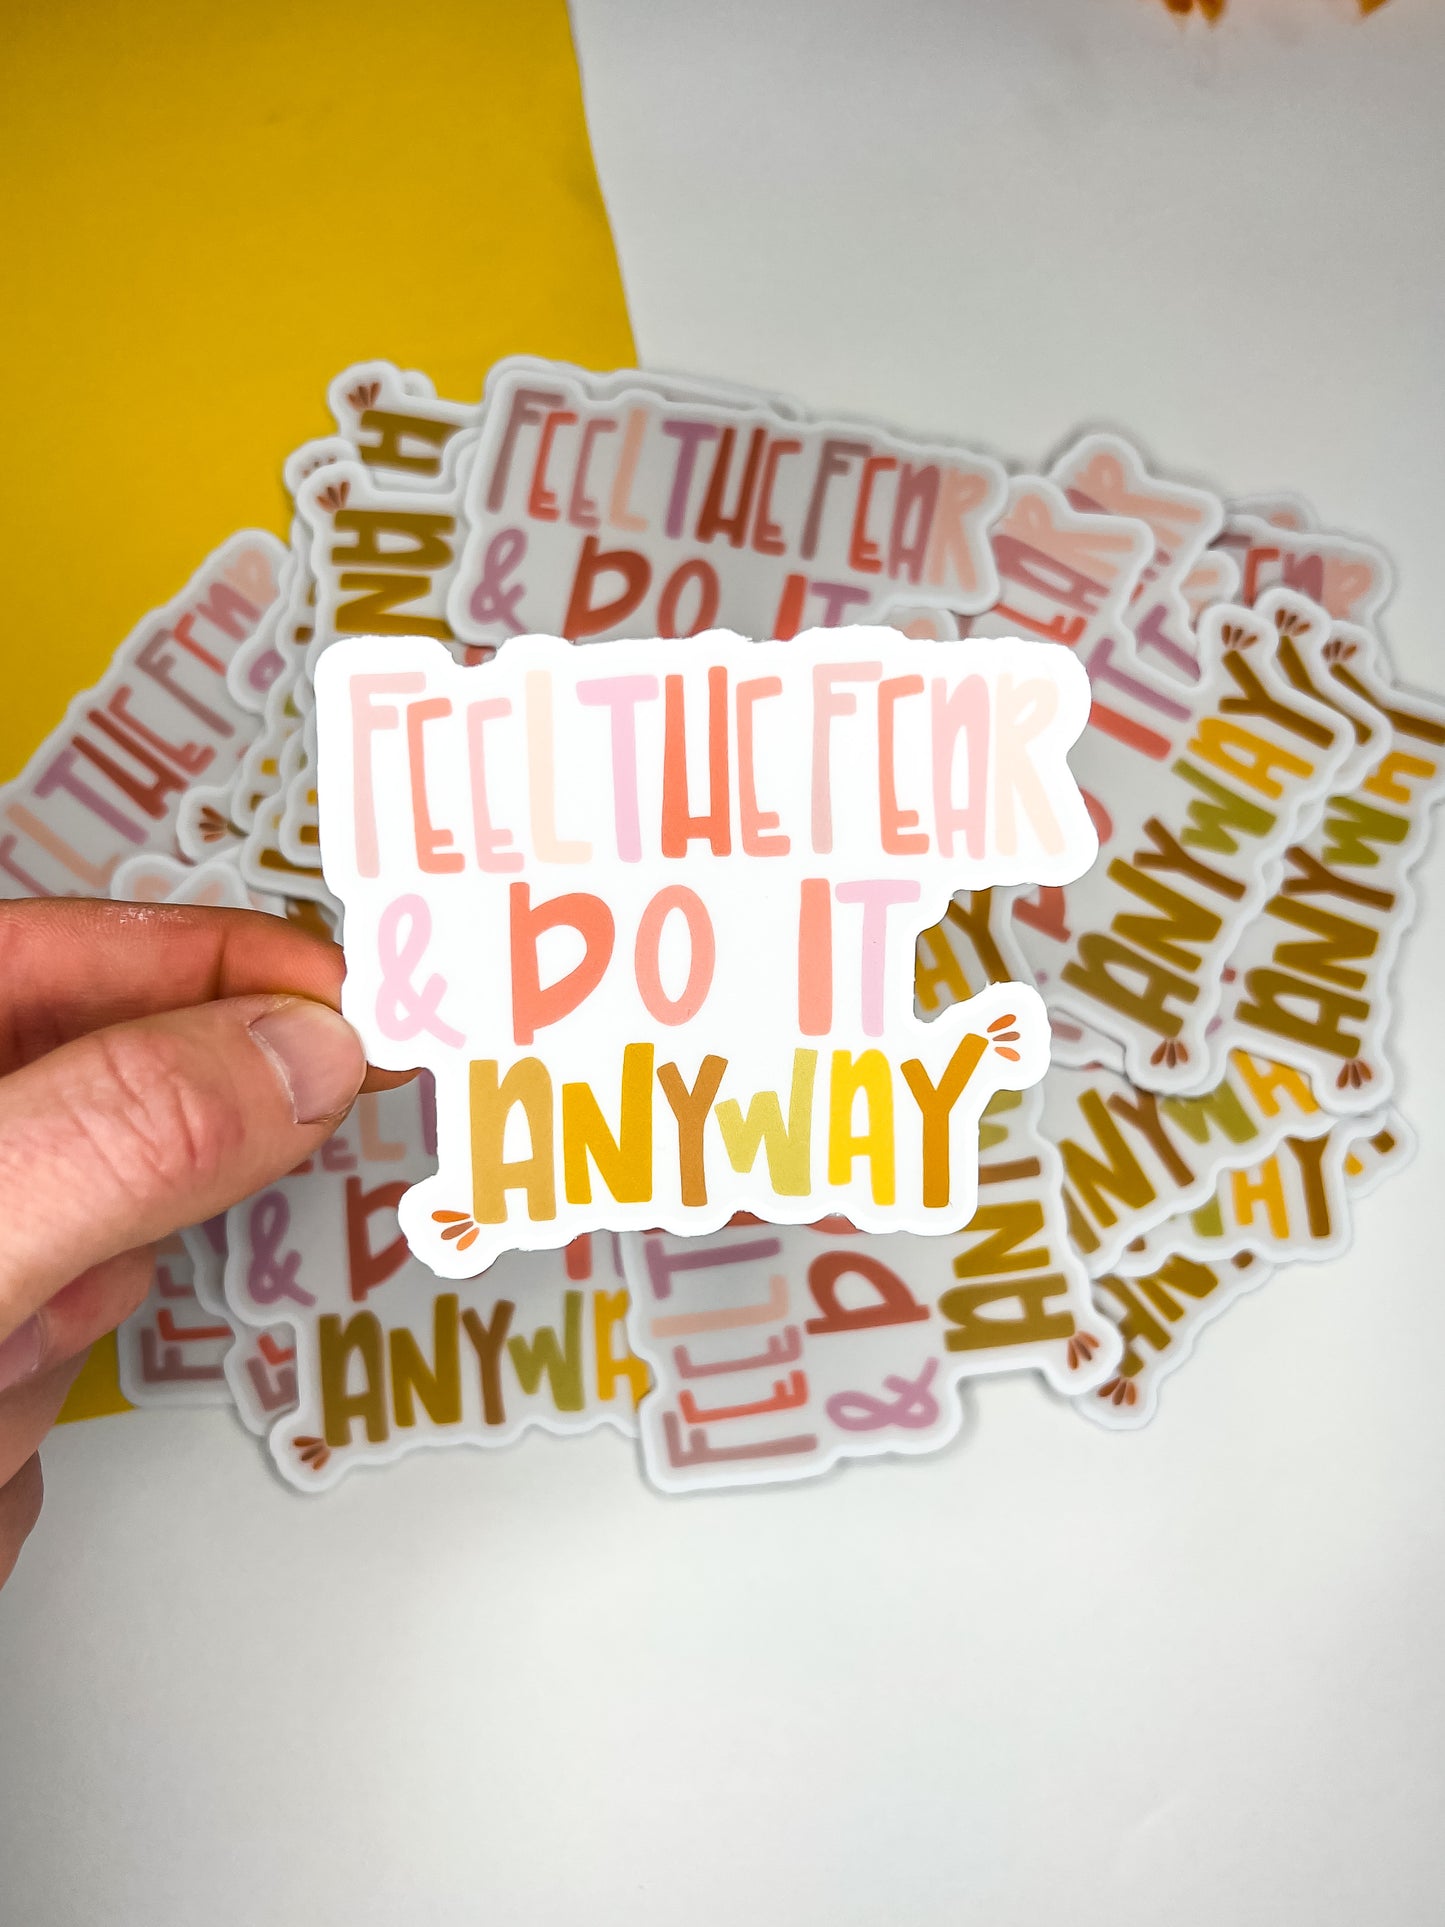 Feel the fear and do it anyway sticker!